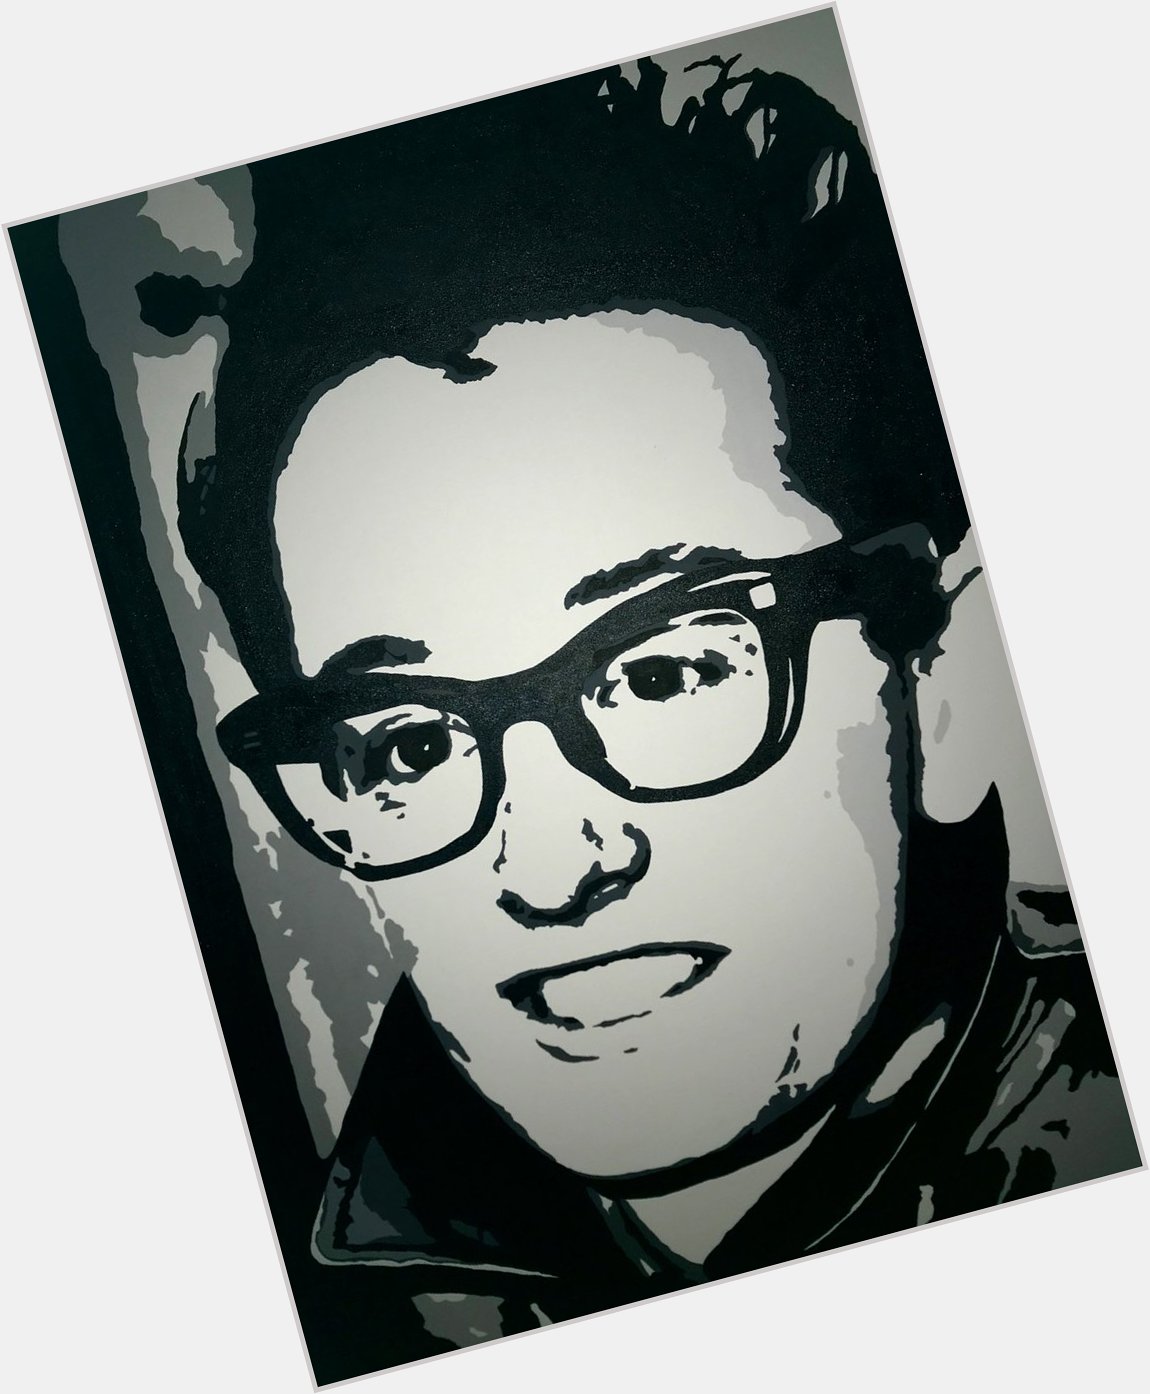 Happy Birthday Buddy Holly - did this piece a couple of years ago now - seems like a good day to post it! 